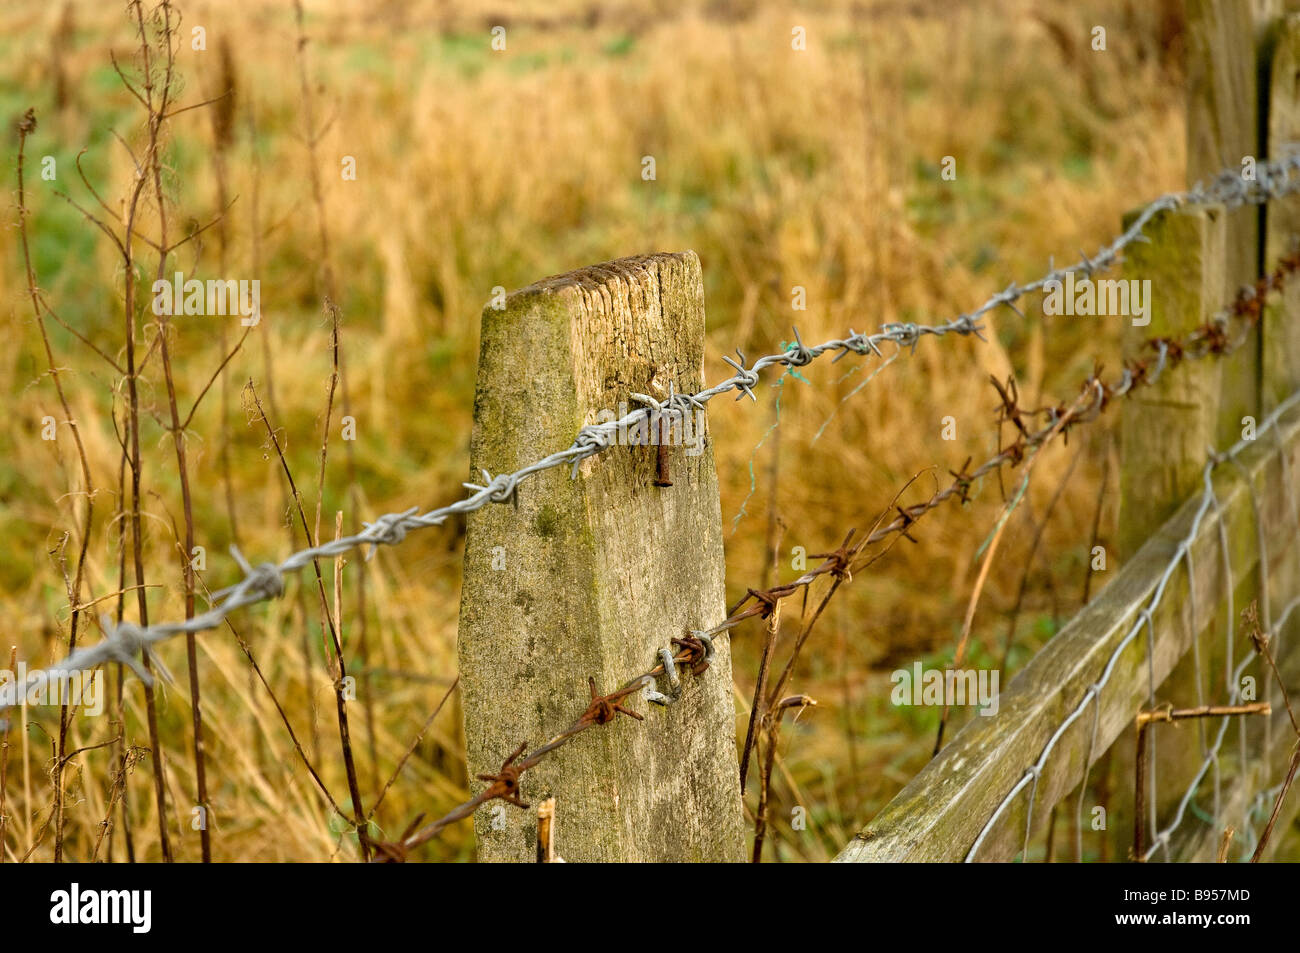 Wooden fence post and barbed wire Close up England UK United Kingdom GB Great Britain Stock Photo